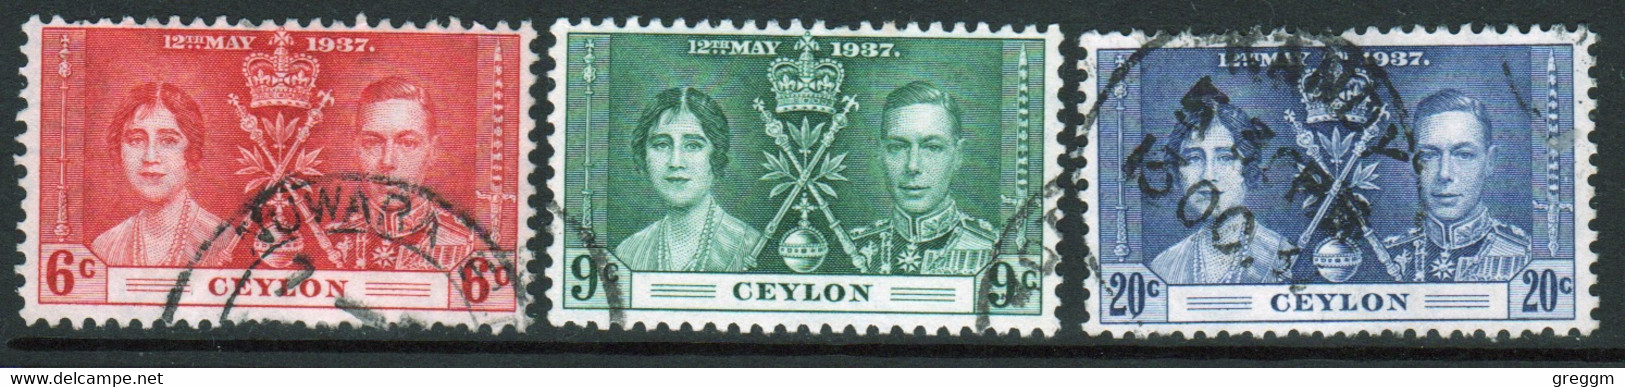 Ceylon George VI  1937 Set Of Stamps Issued To Celebrate The Coronation In Fine Used. - Ceylon (...-1947)